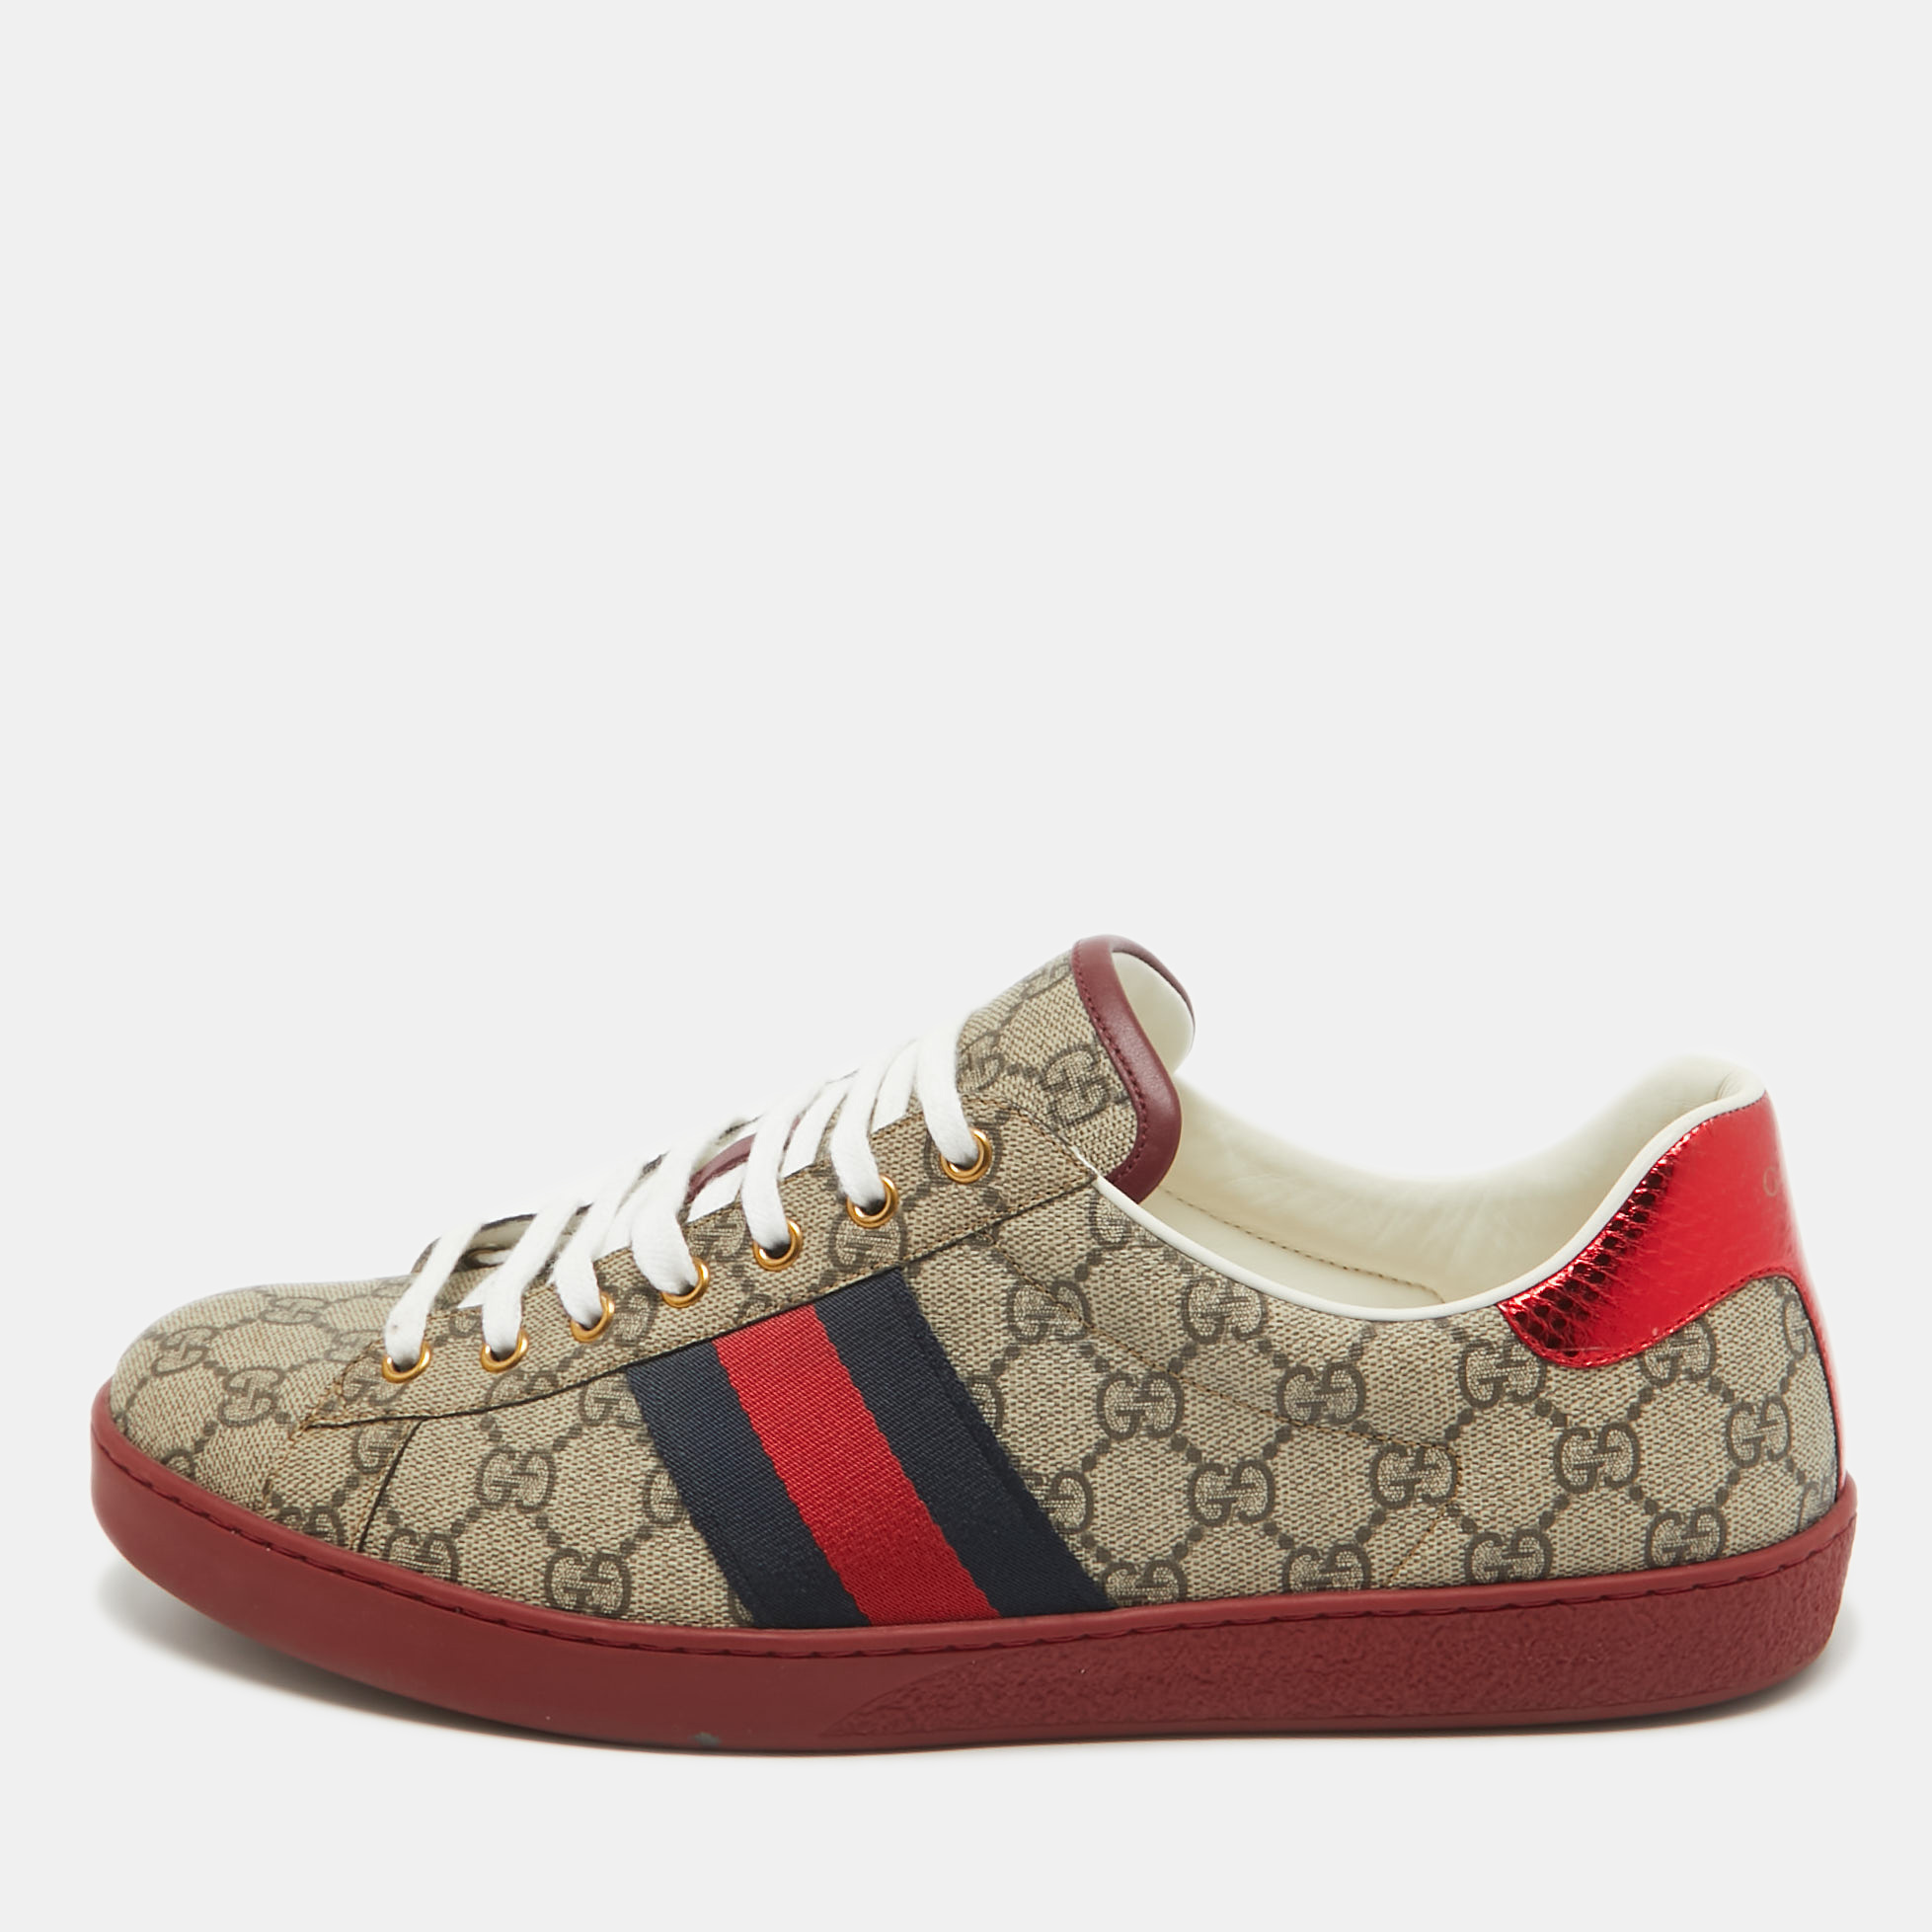 Pre-owned Gucci Beige Gg Supreme Canvas Ace Sneakers Size 46.5